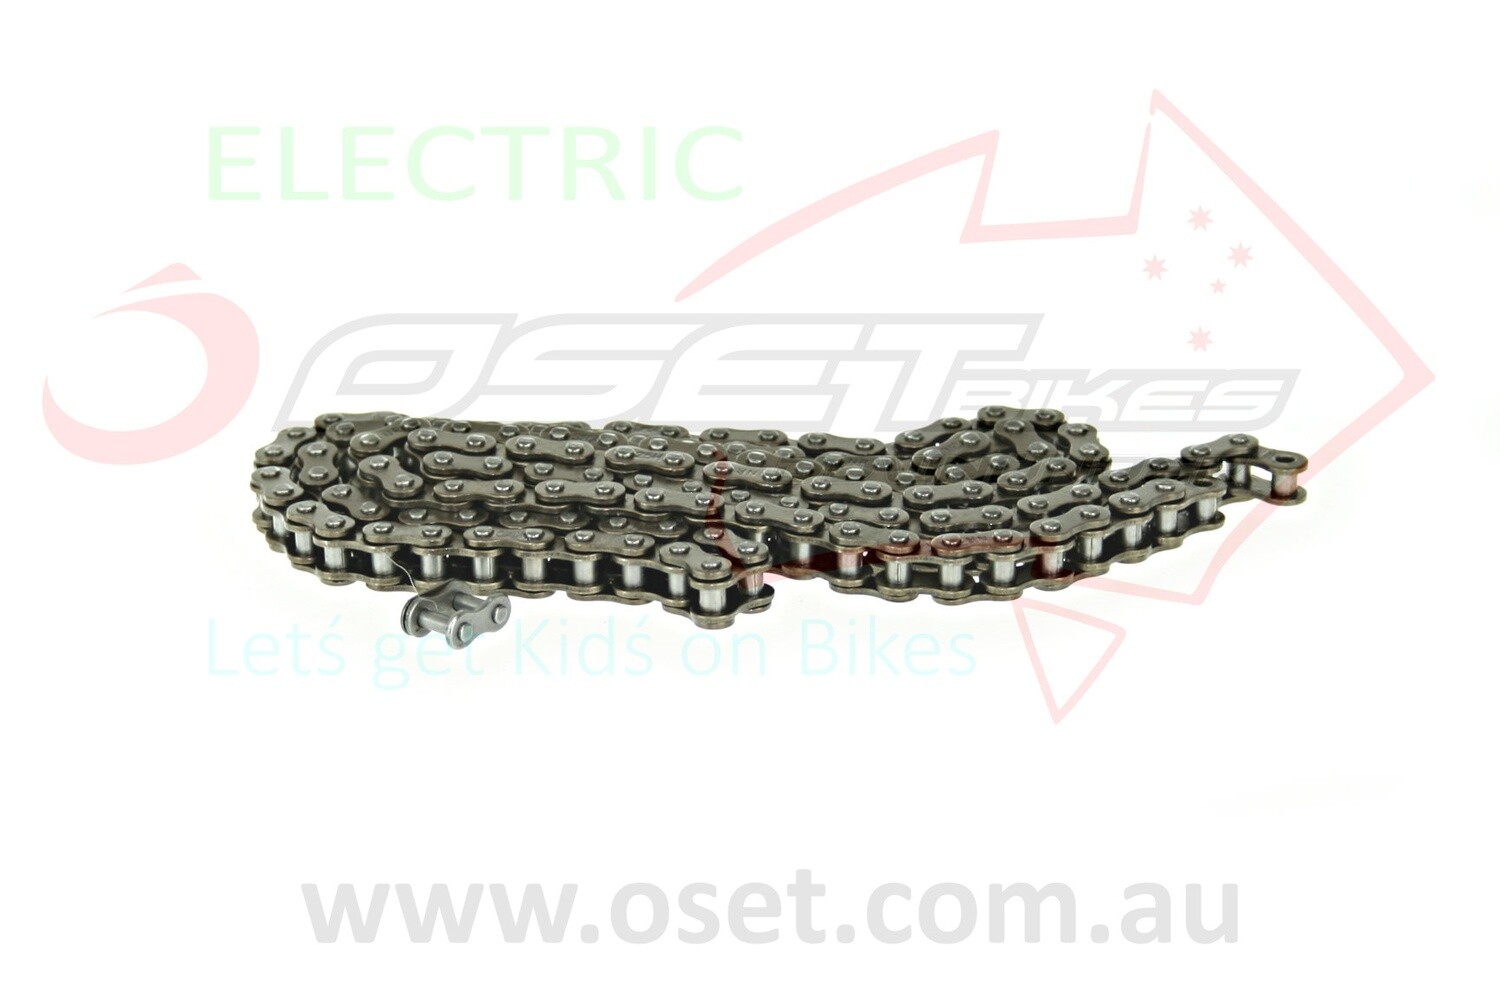 Chain for China OSET12, L:126 pre 2015